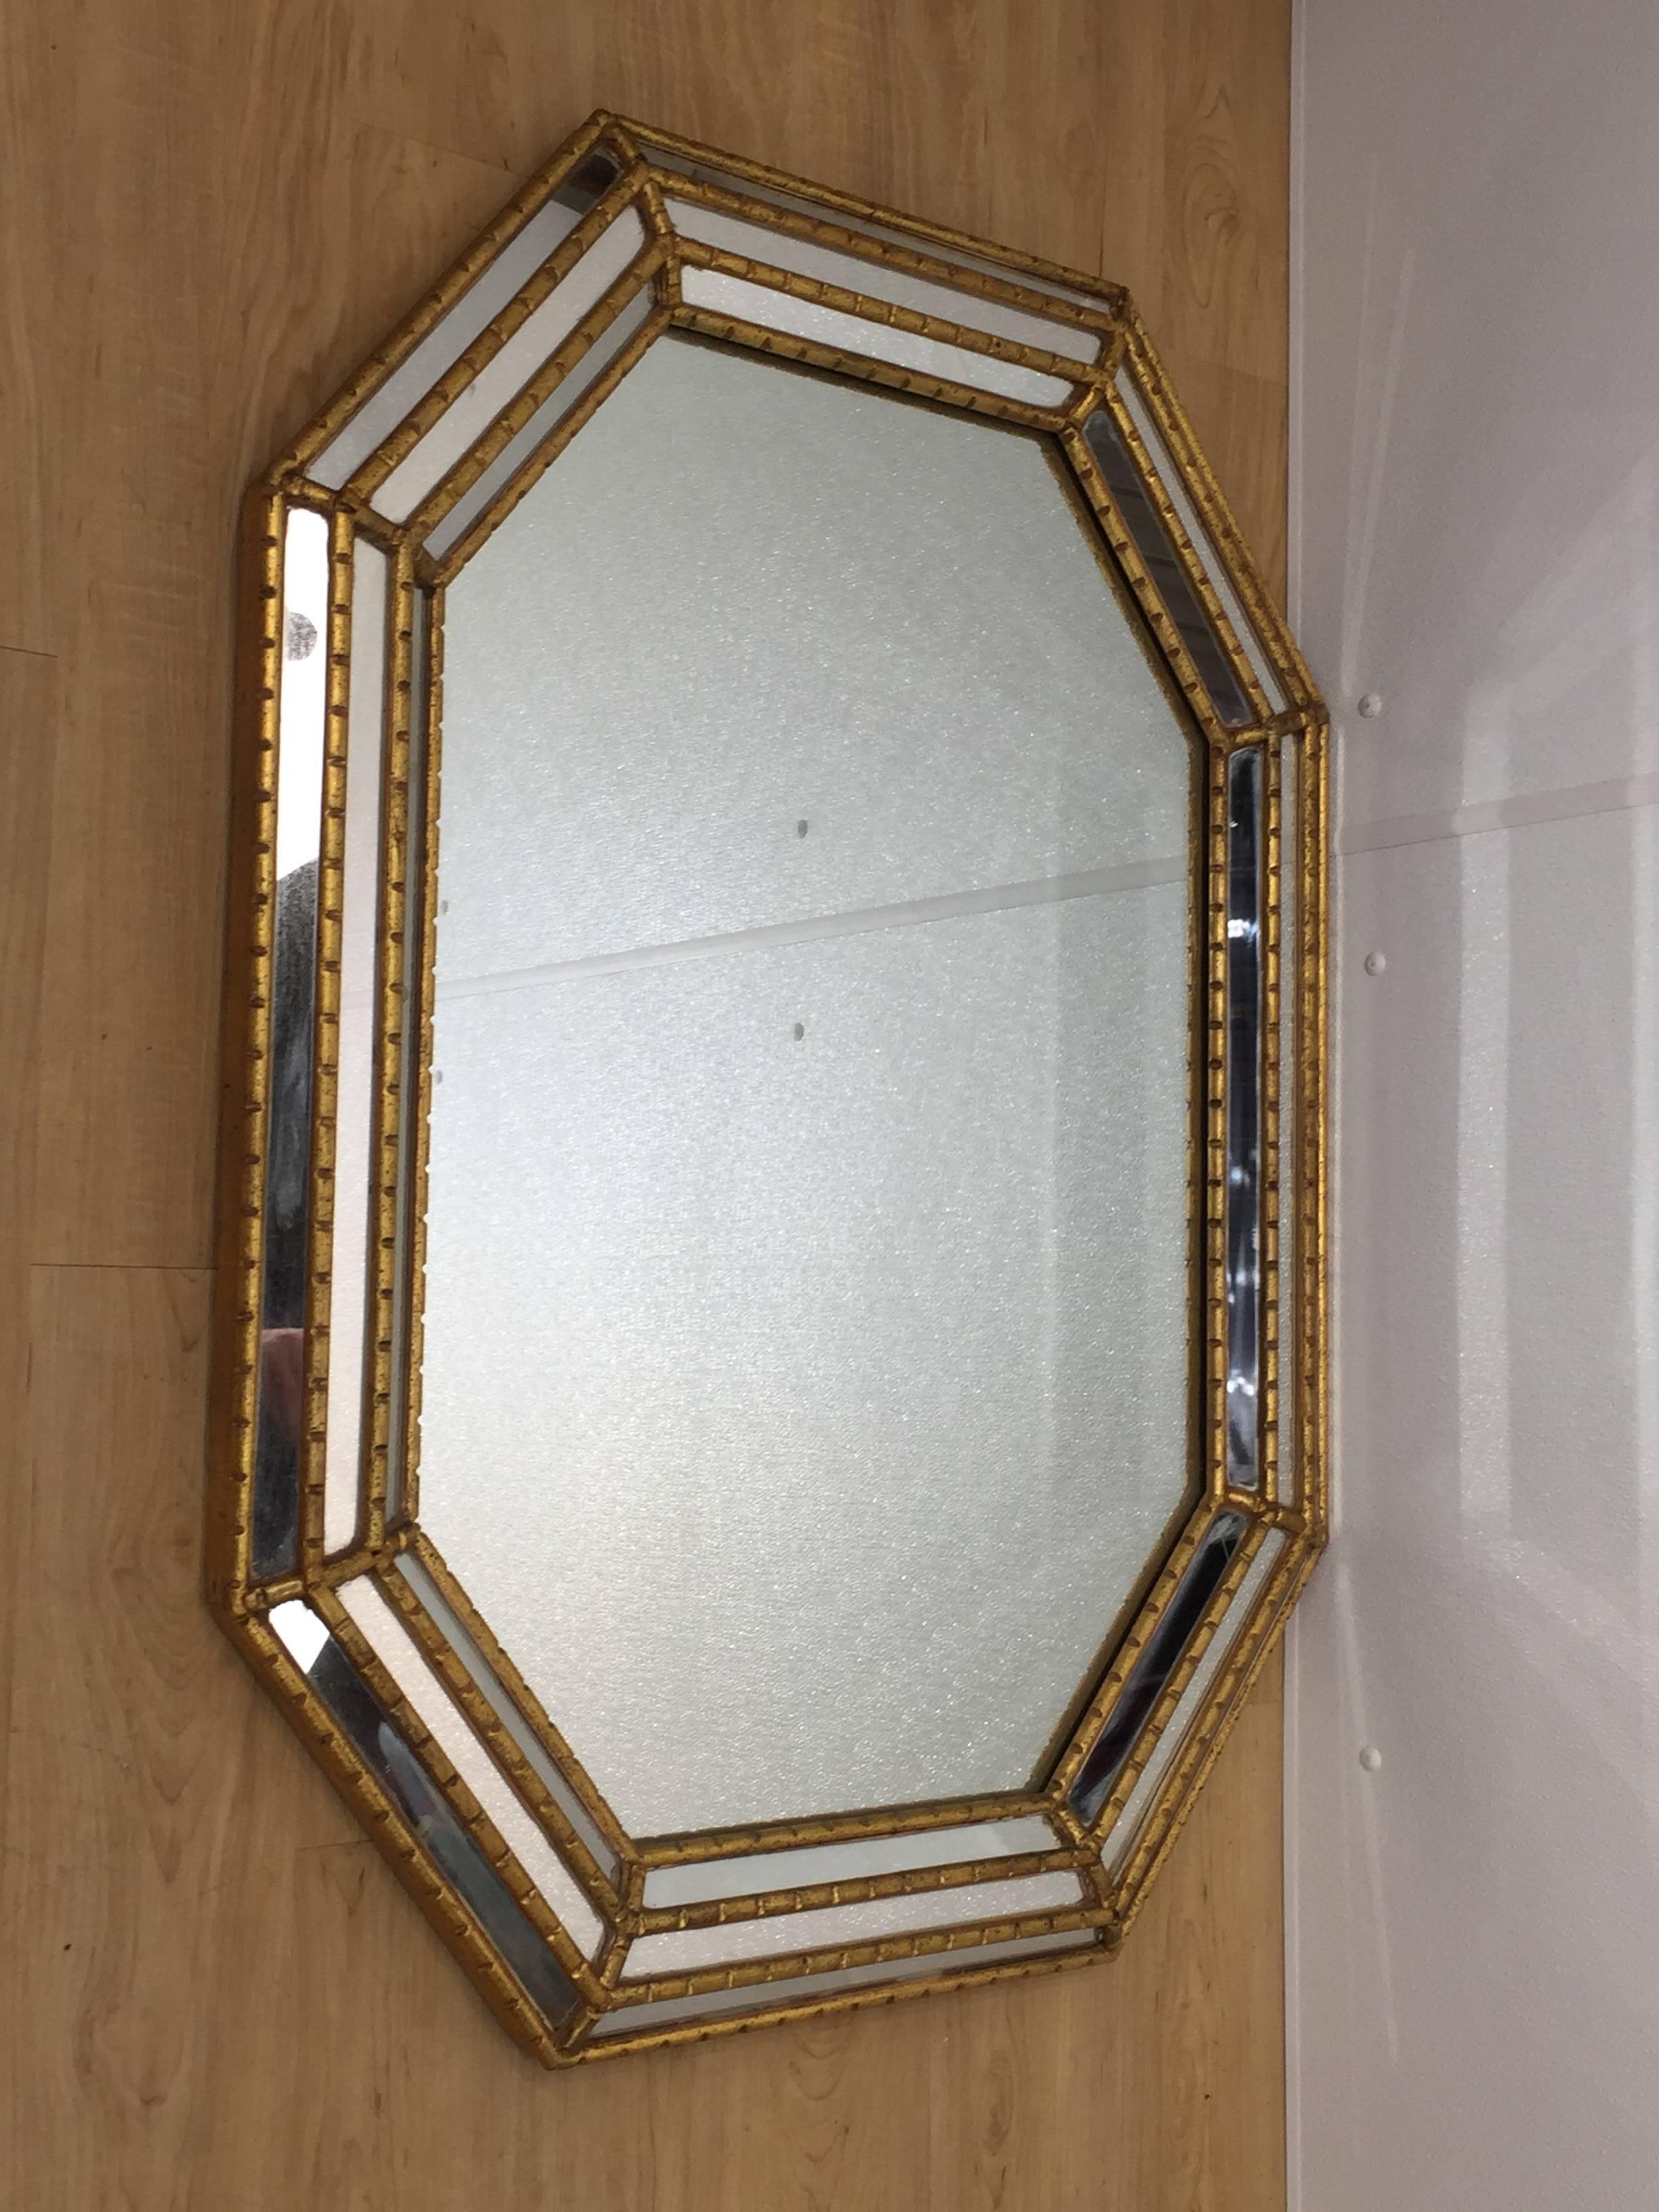 La Barge octagonal giltwood mirror with continuous surround of three raised mirror panels with large central mirrored plate. Marked La Barge. Made in Italy.